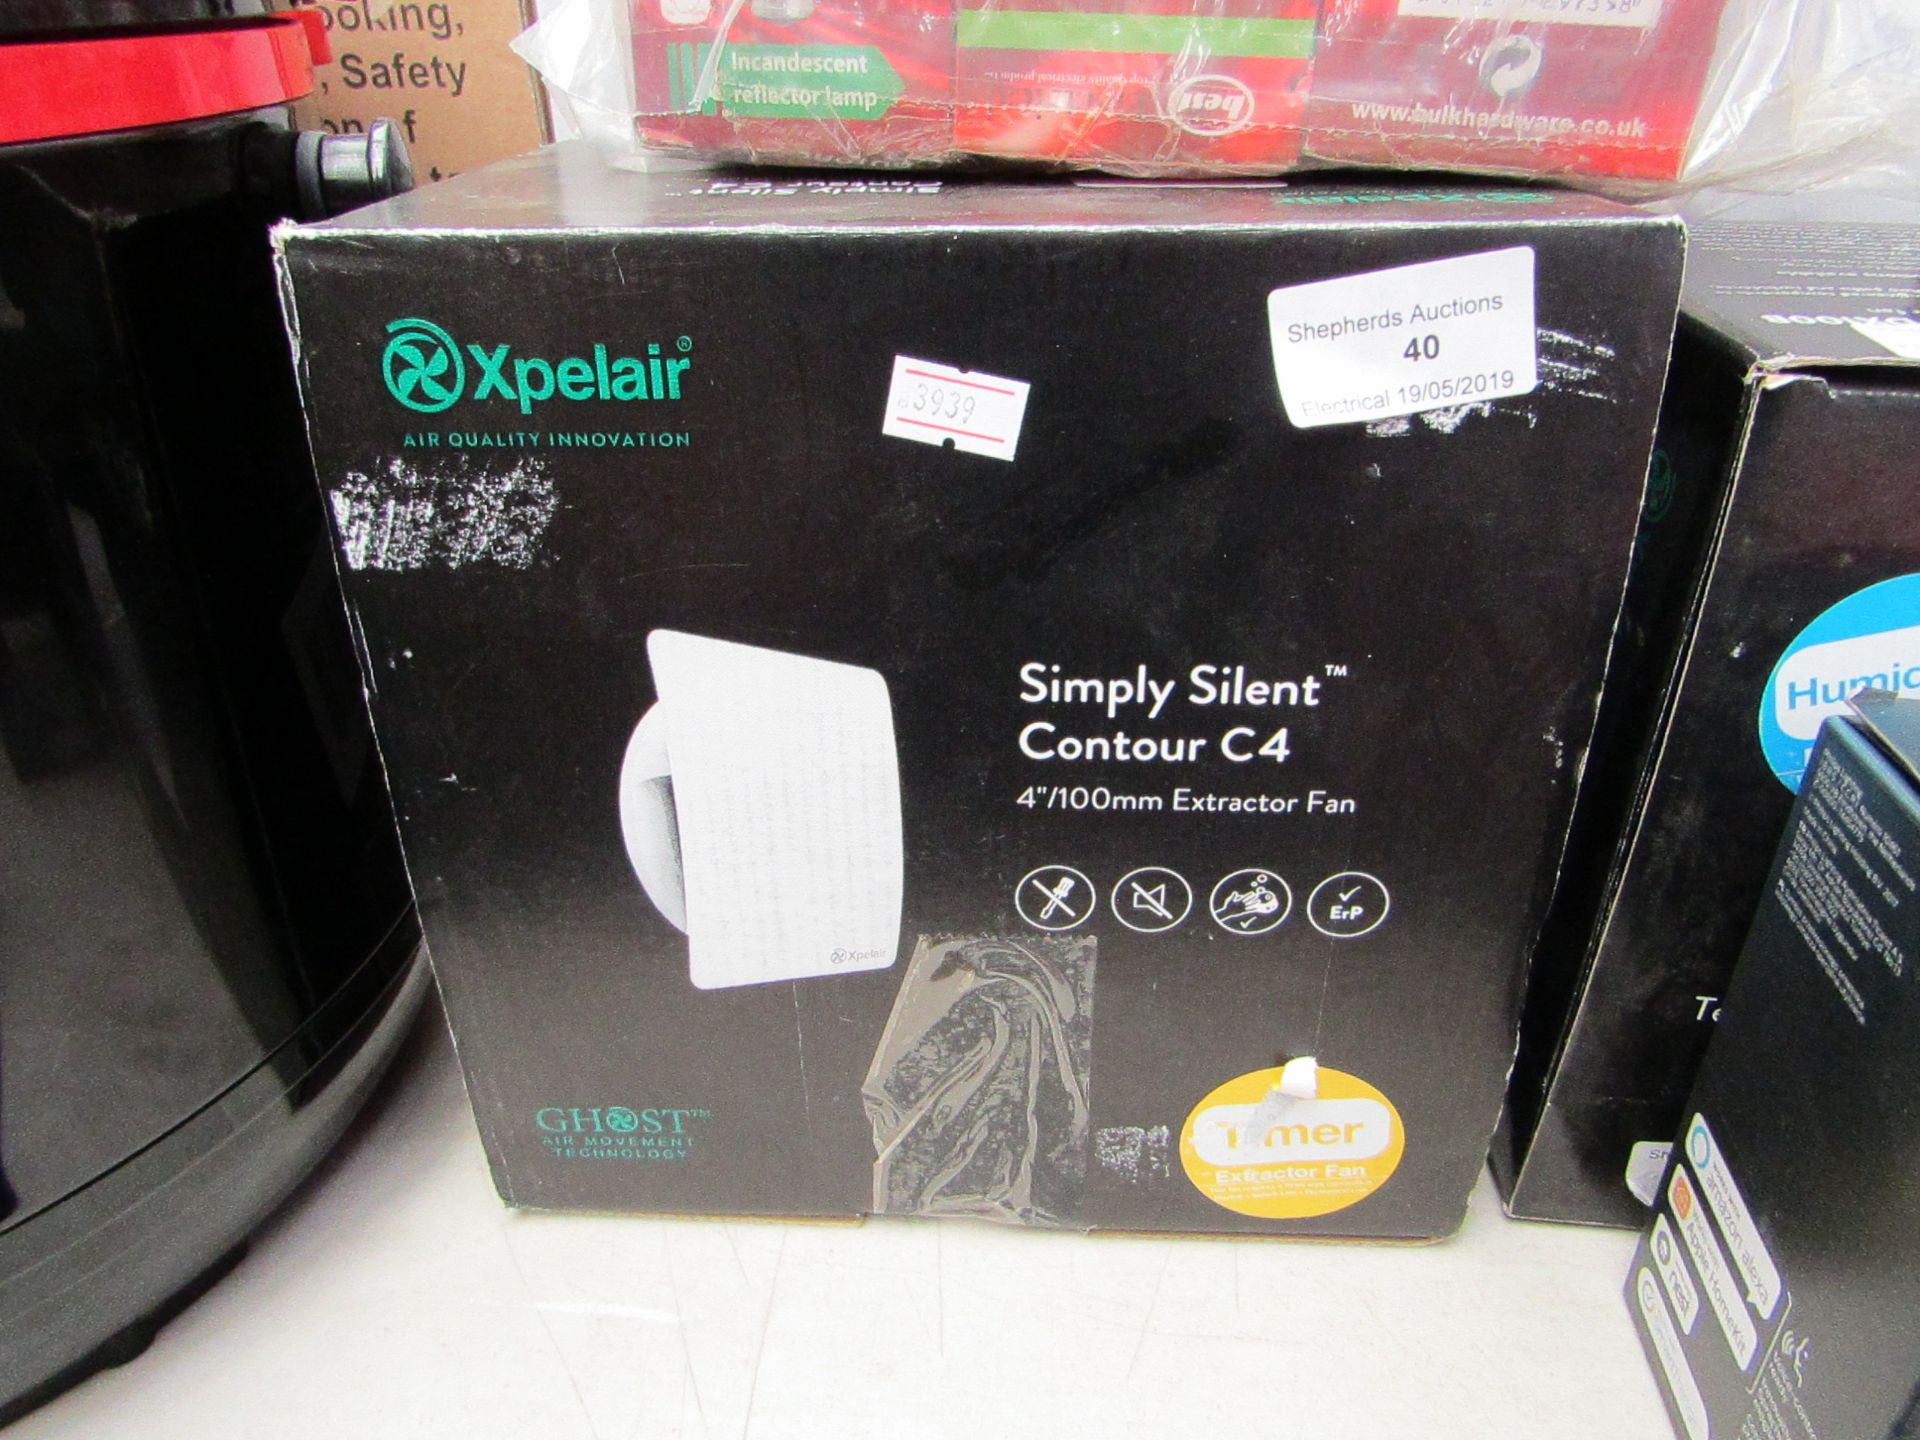 Xpelair Simply Silent Contour C4 4"/100 Extractor Fan. Unchecked & Boxed